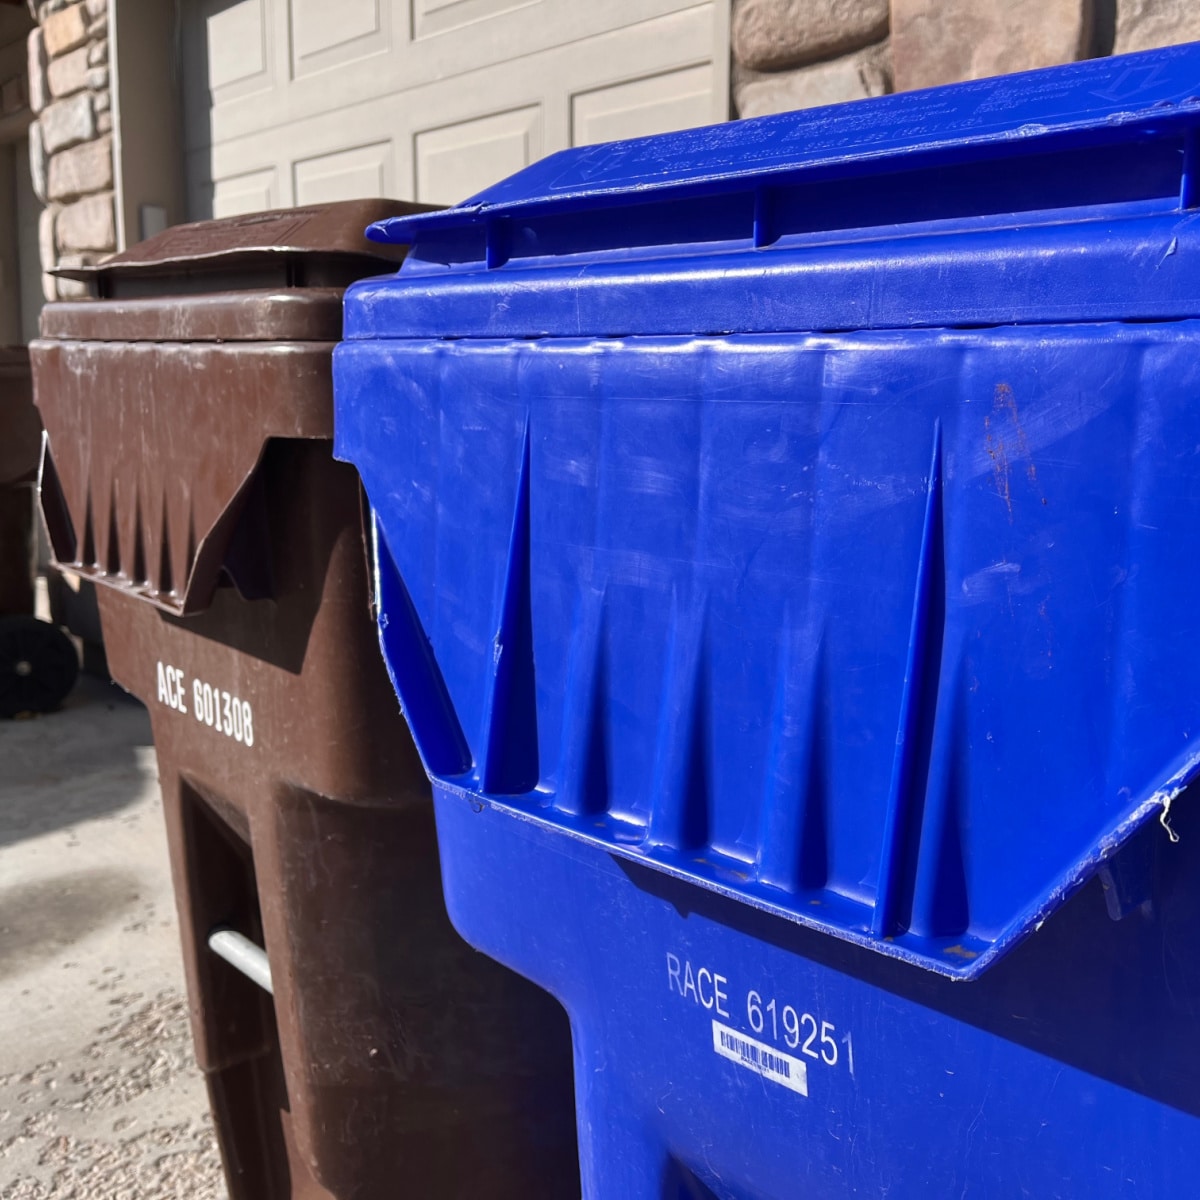 Thanksgiving may Impact your Garbage Day